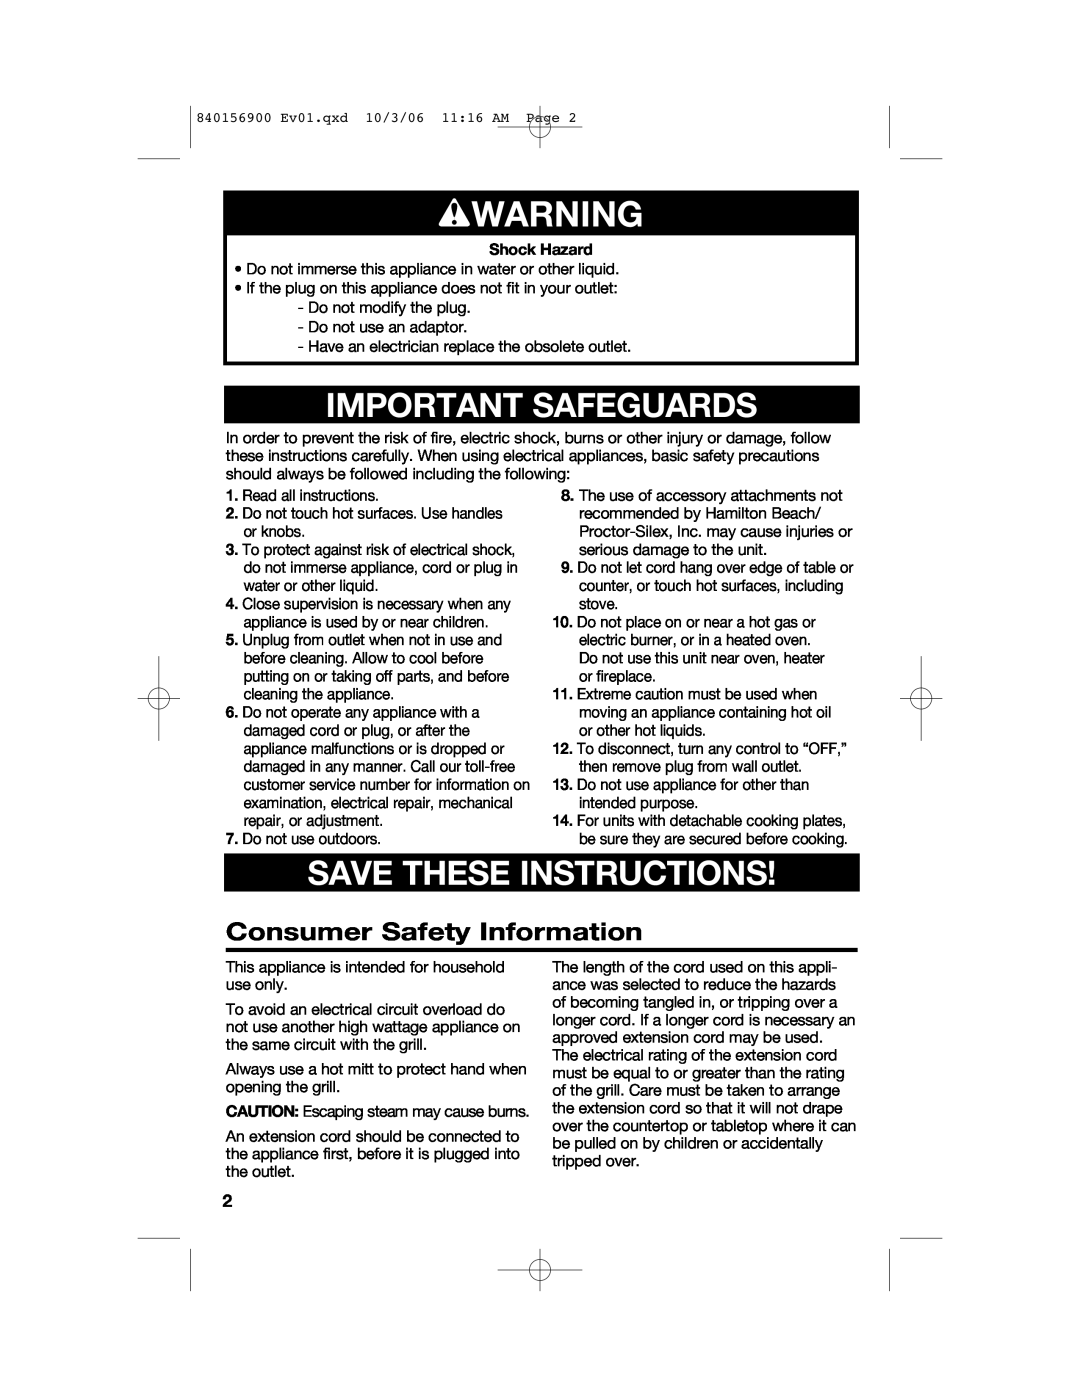 Hamilton Beach 25285 manual wWARNING, Important Safeguards, Save These Instructions, Consumer Safety Information 